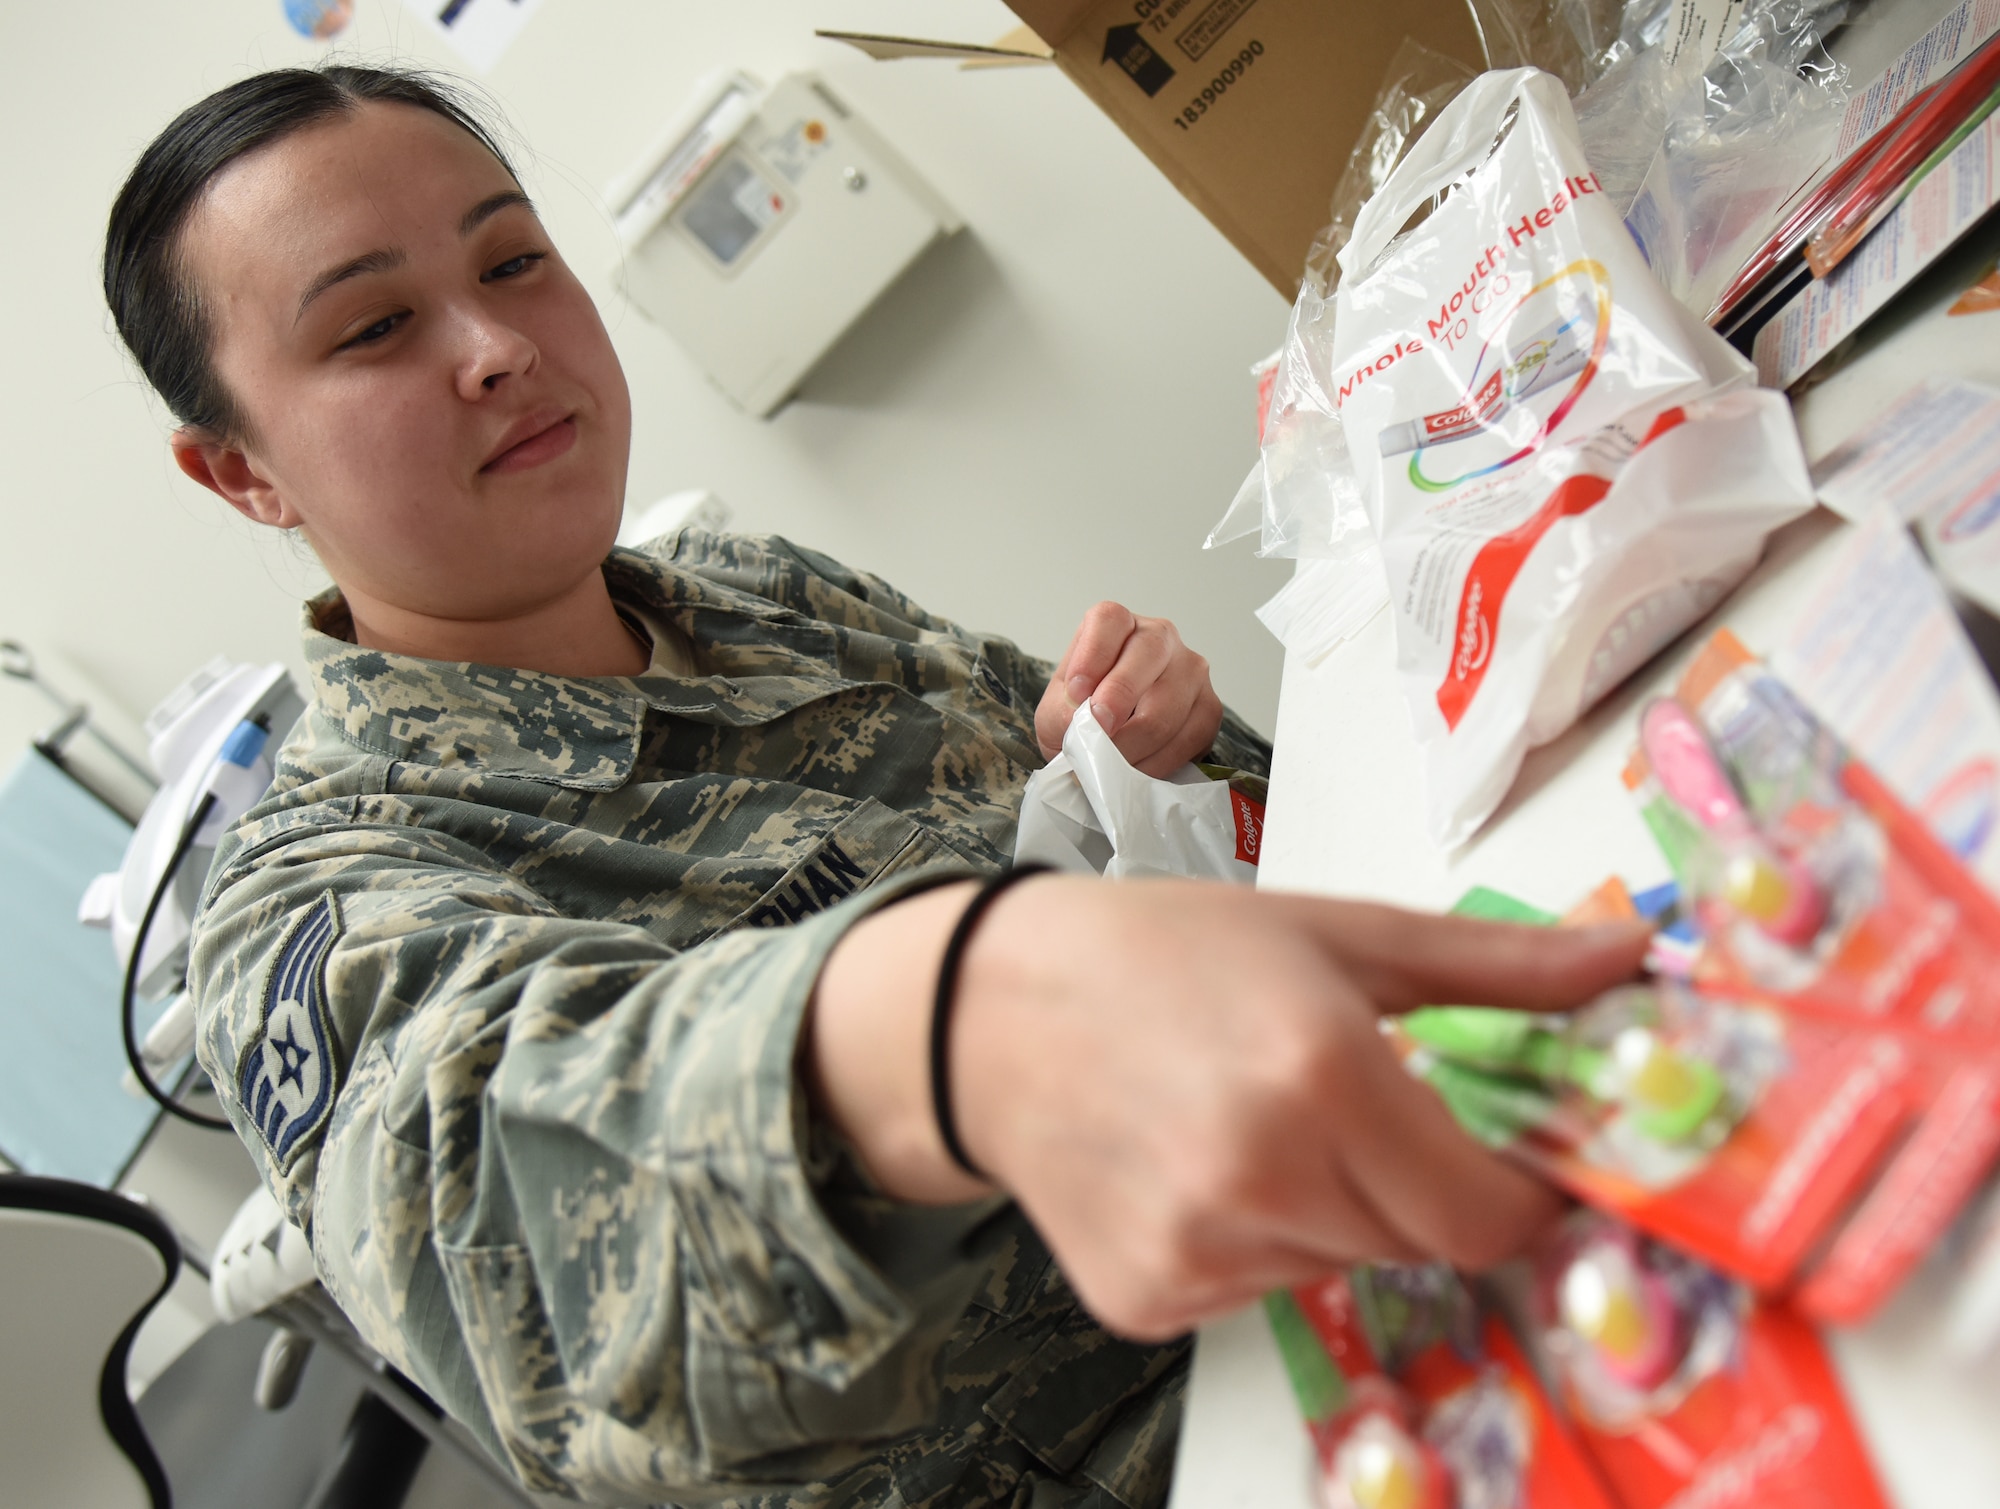 U.S. Air Force Staff Sgt. Iva Phan, 81st Dental Squadron dental assistant, places toothbrushes in bags for military children during the 9th Annual Give Kids a Smile Day at the dental clinic inside the Keesler Medical Center at Keesler Air Force Base, Mississippi, Feb. 15, 2019. The event was held in recognition of National Children's Dental Health Month and included free dental exams, radiographs and cleanings for children age two and older. (U.S. Air Force photo by Kemberly Groue)